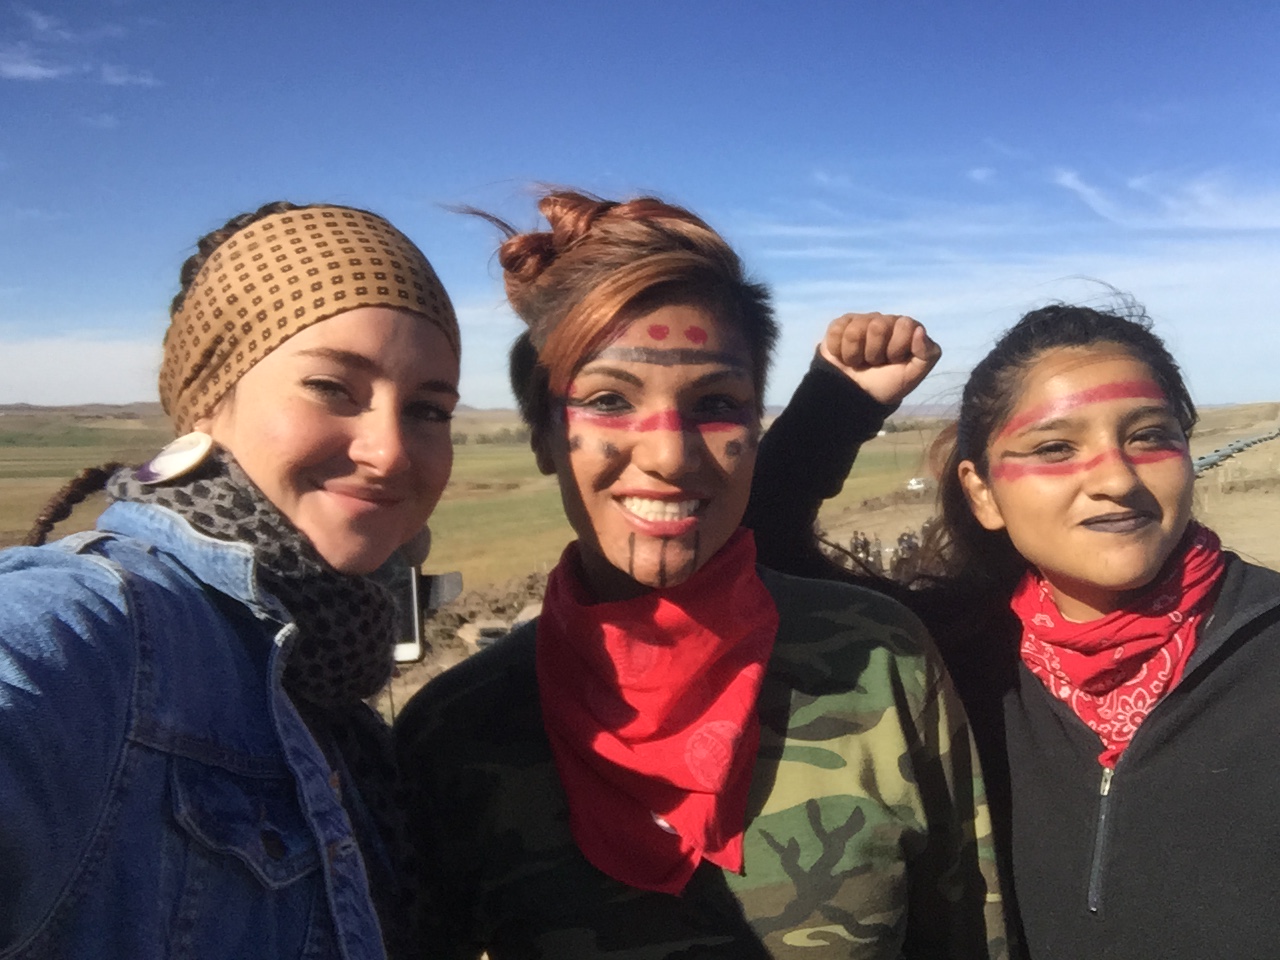 Actress Shailene Woodley (left) standing with two other people protesting the North Dakota Access Pipeline on Oct. 10, 2016. (Shailene Woodley)